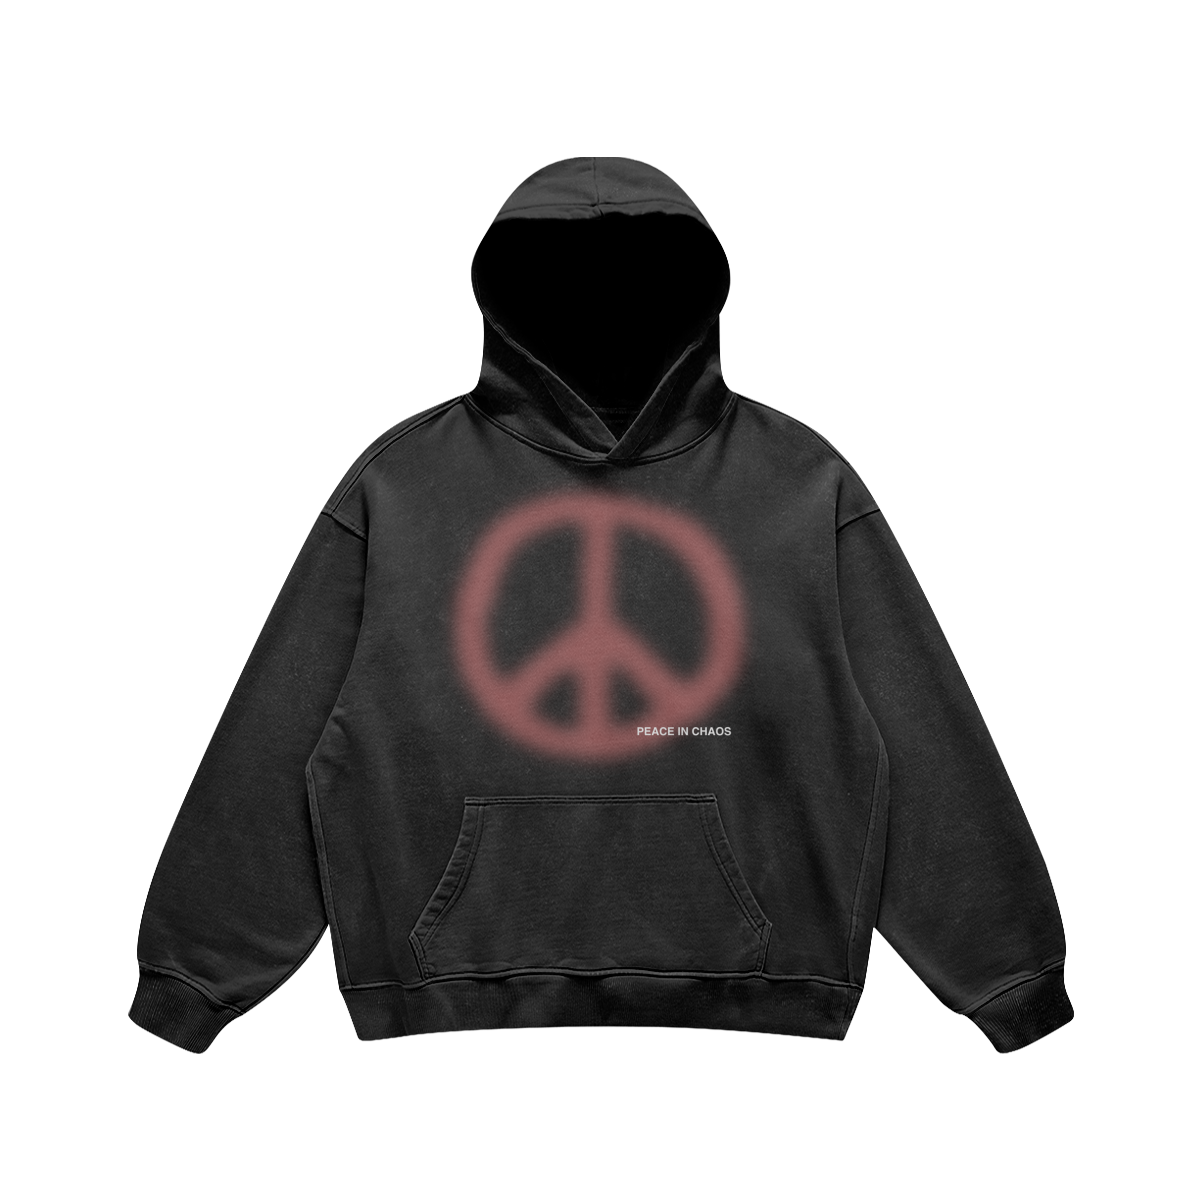 "Peace In Chaos" Hoodie